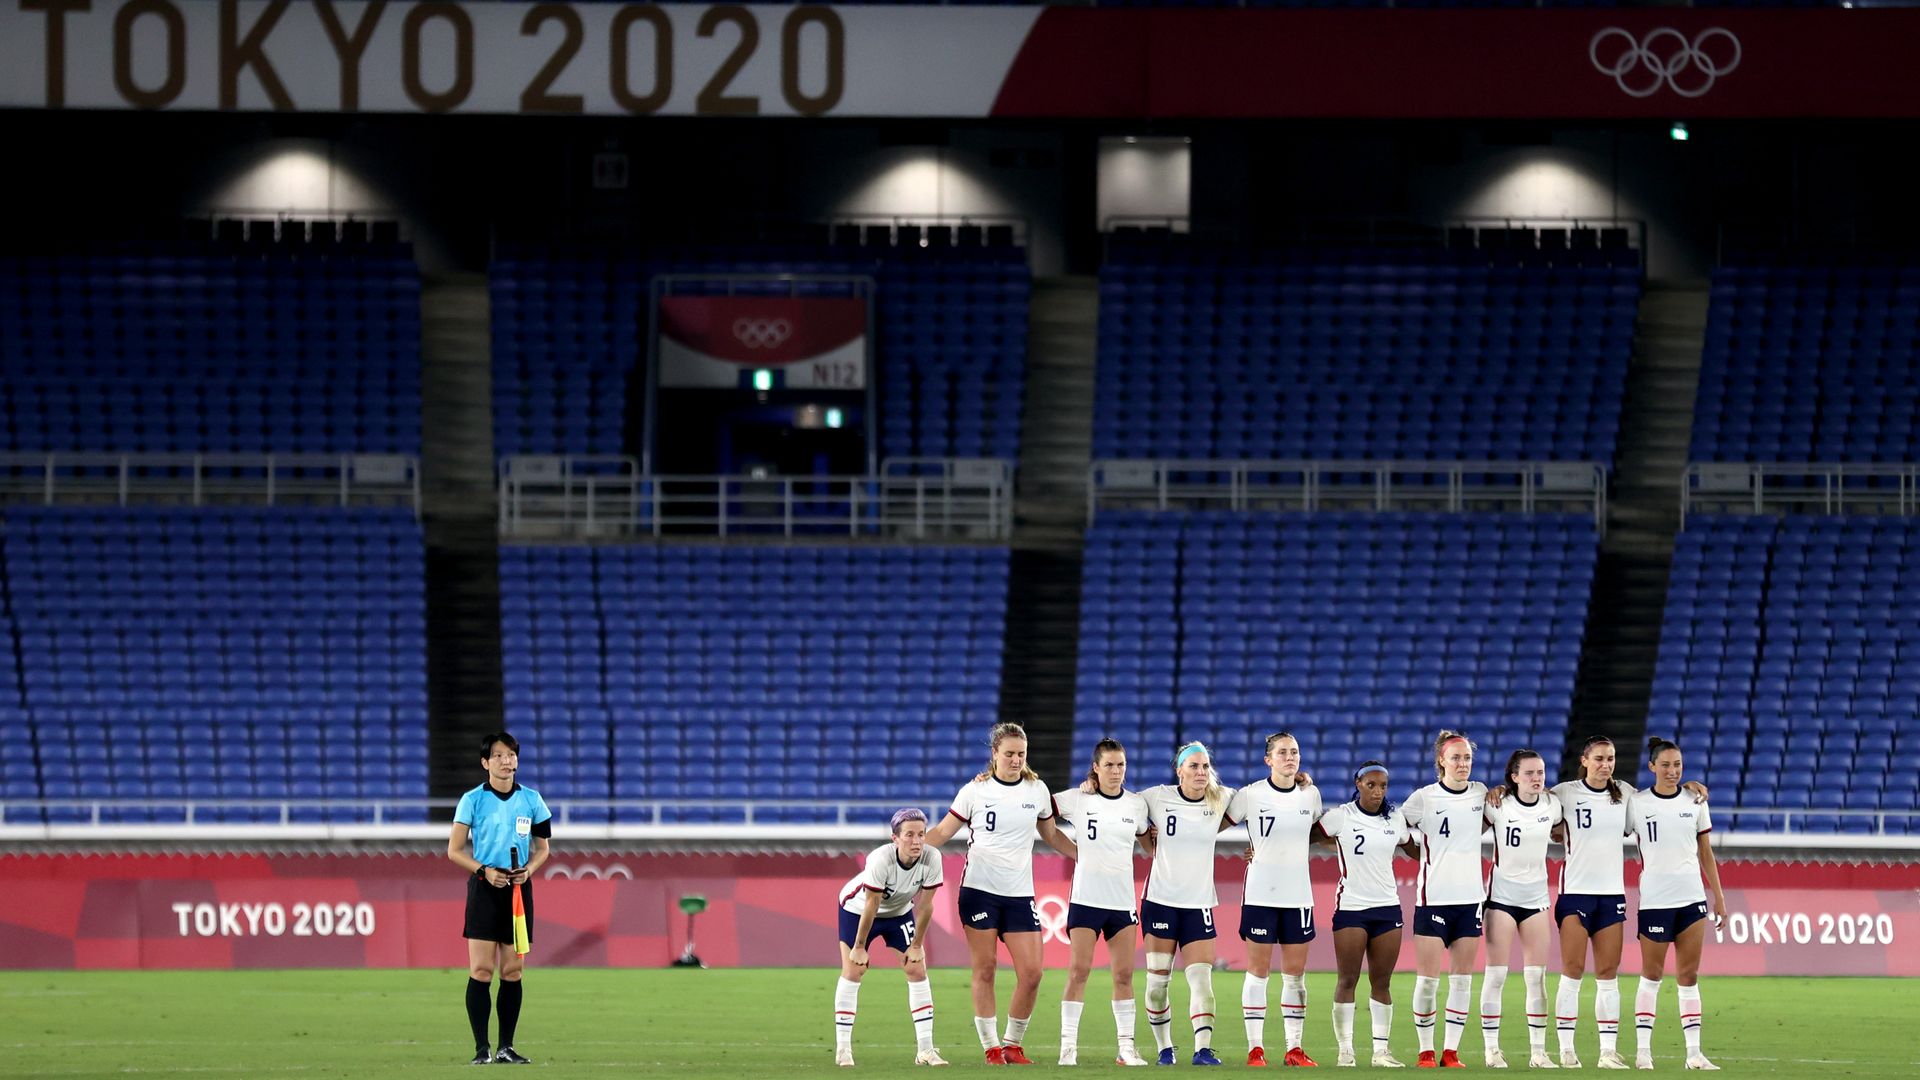 Players of Team United States react during the penalty shoot out during the Women's Quarter Final